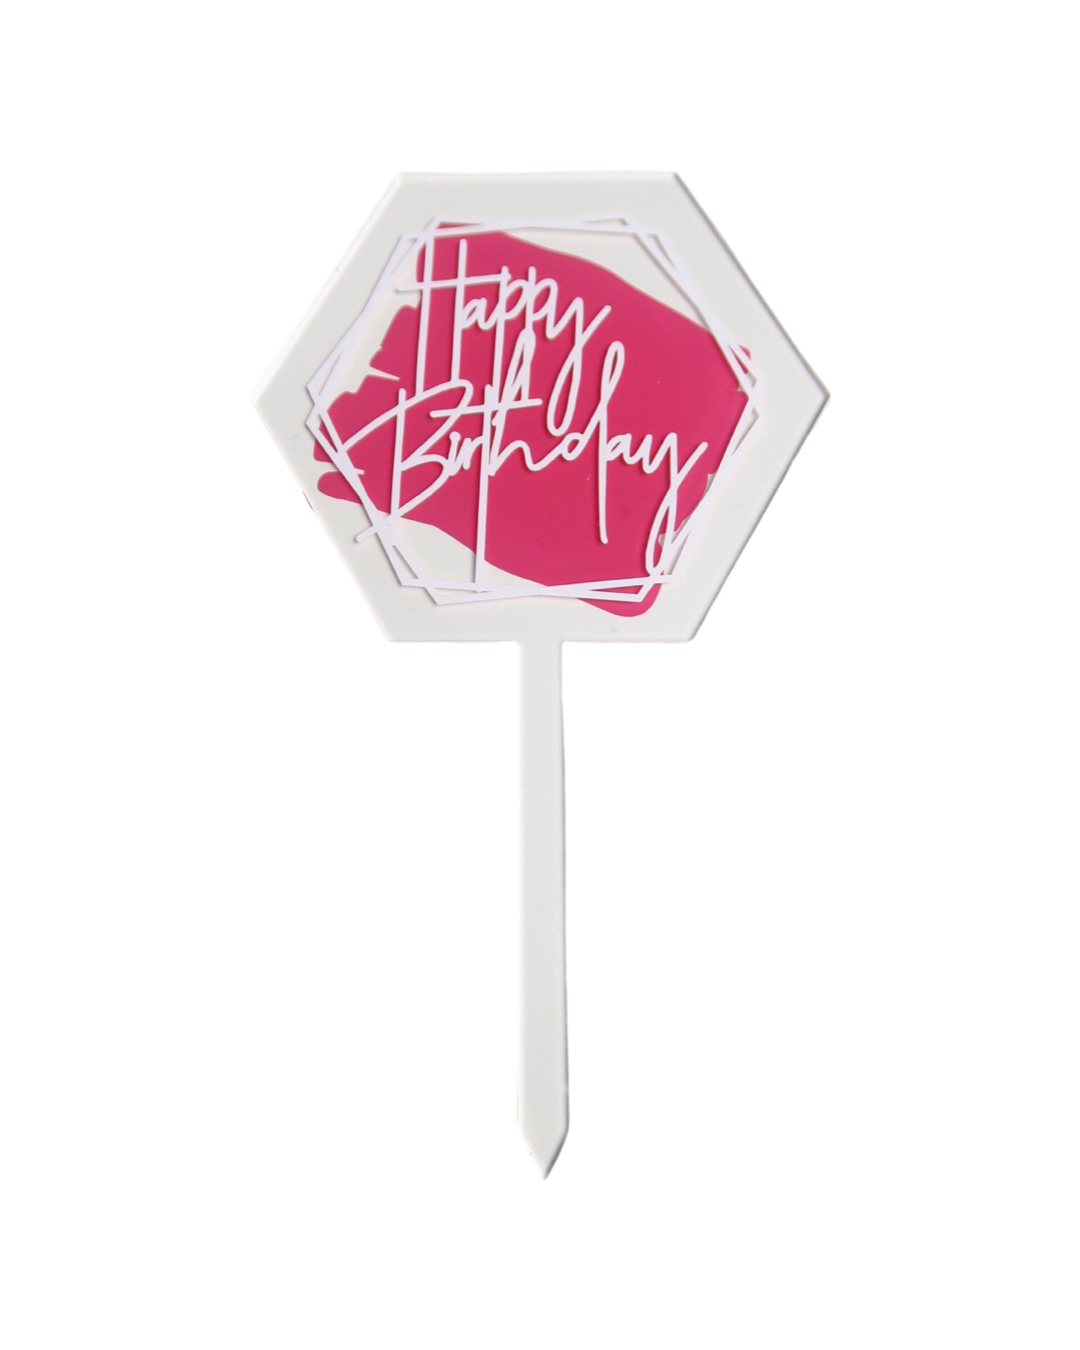 Cake topper - to label yourself